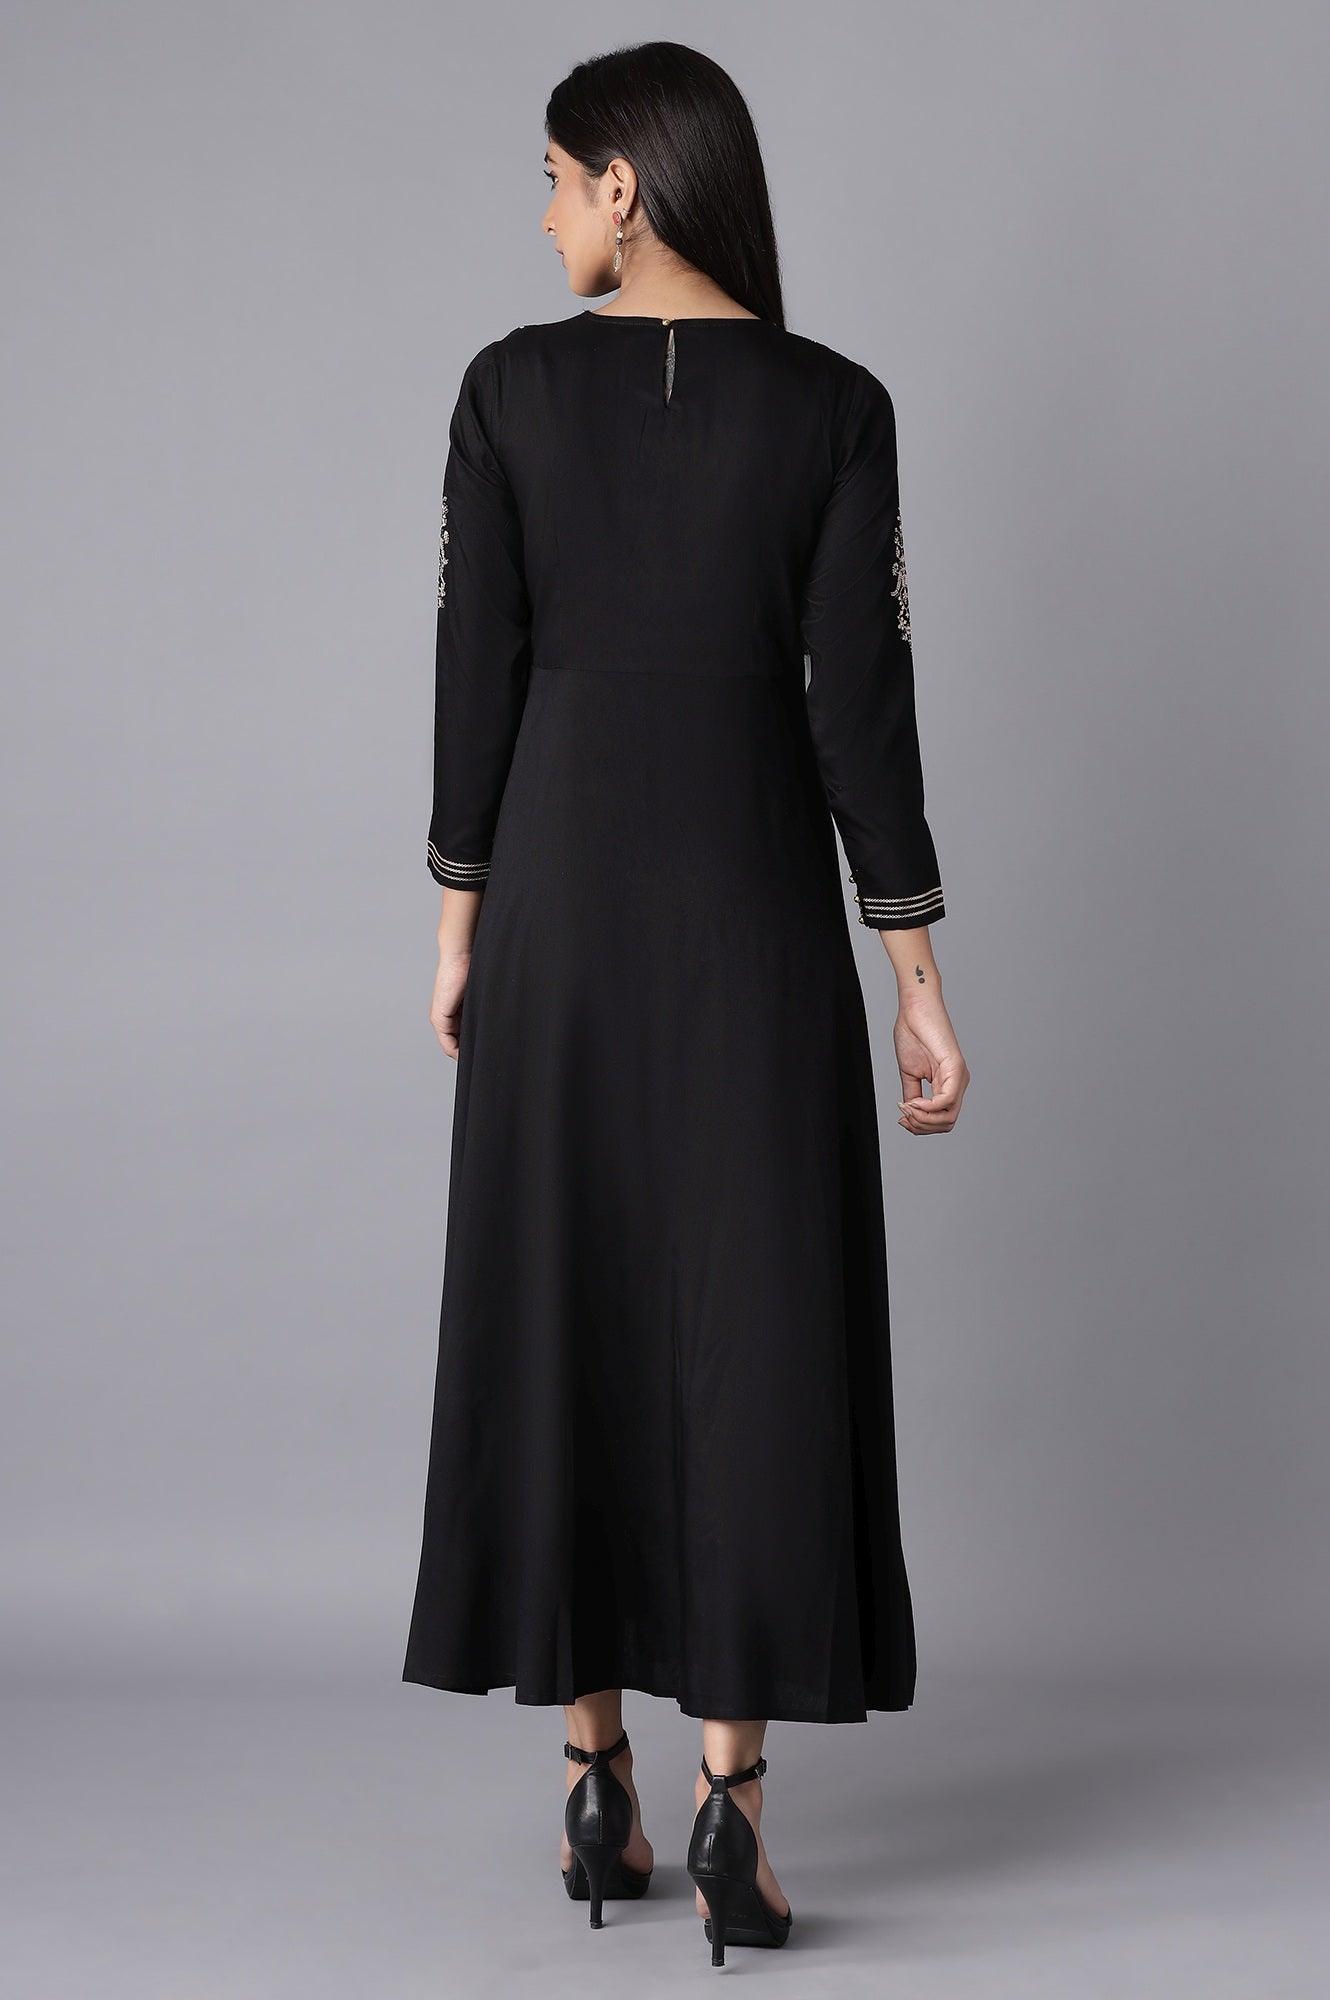 Black Dress with Embroidery - wforwoman